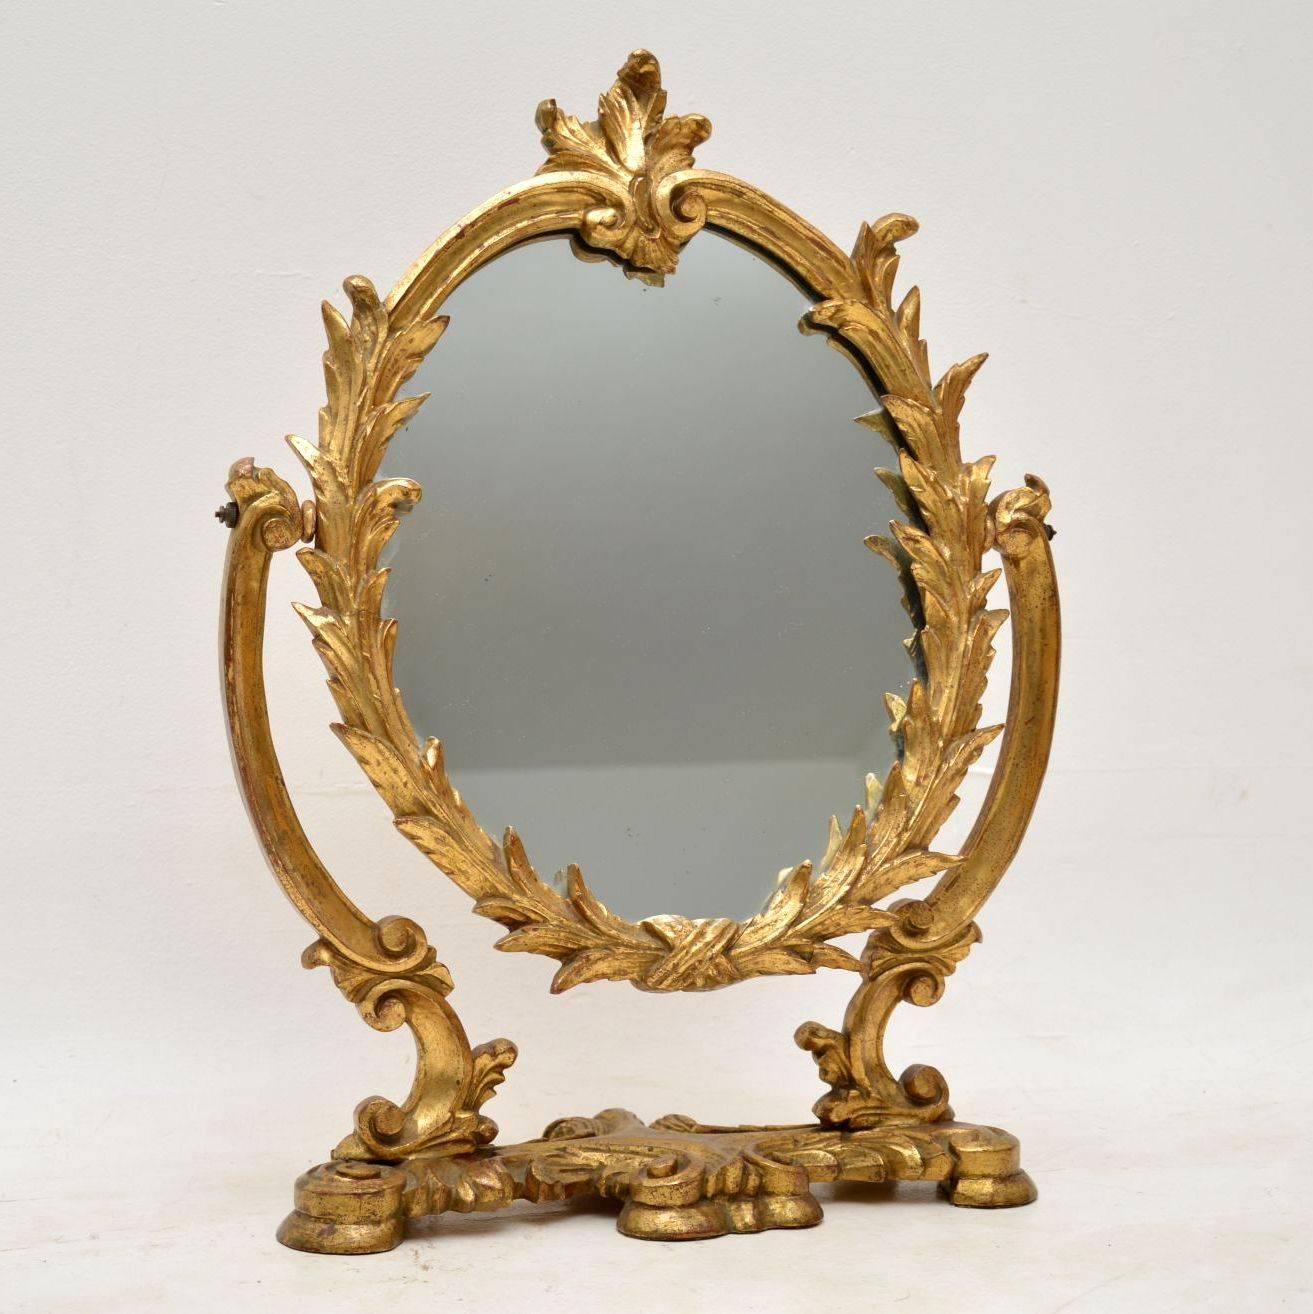 Antique carved giltwood vanity mirror in excellent original condition. I believe this is Italian from circa 1920-1930s period. The gilt finish has just the right amount of wear, which give this piece loads of character.

Measures: Width 17 inches,